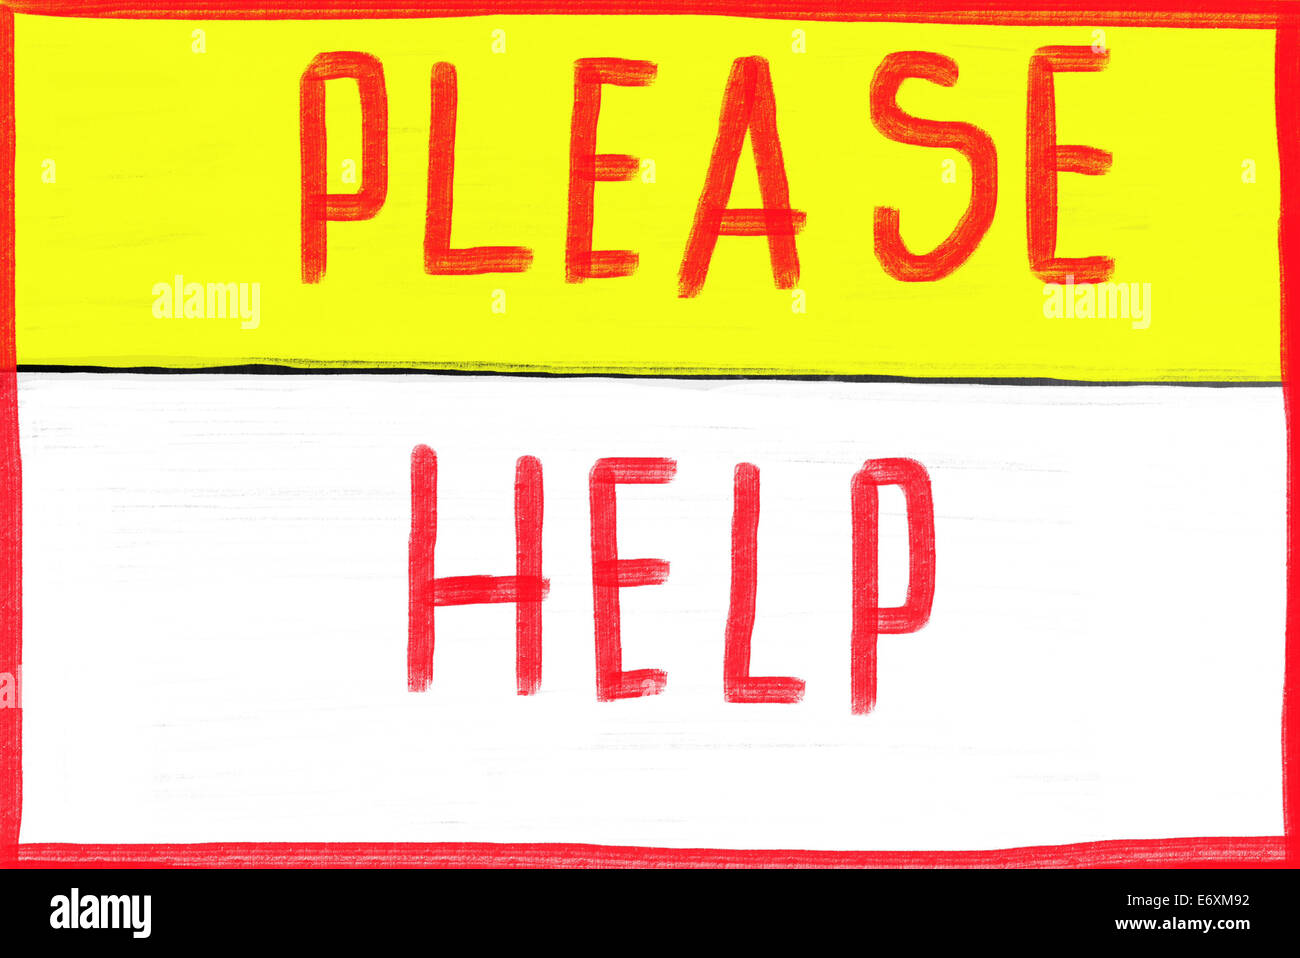 3d Road Sign Saying Please Donate Stock Illustration - Download